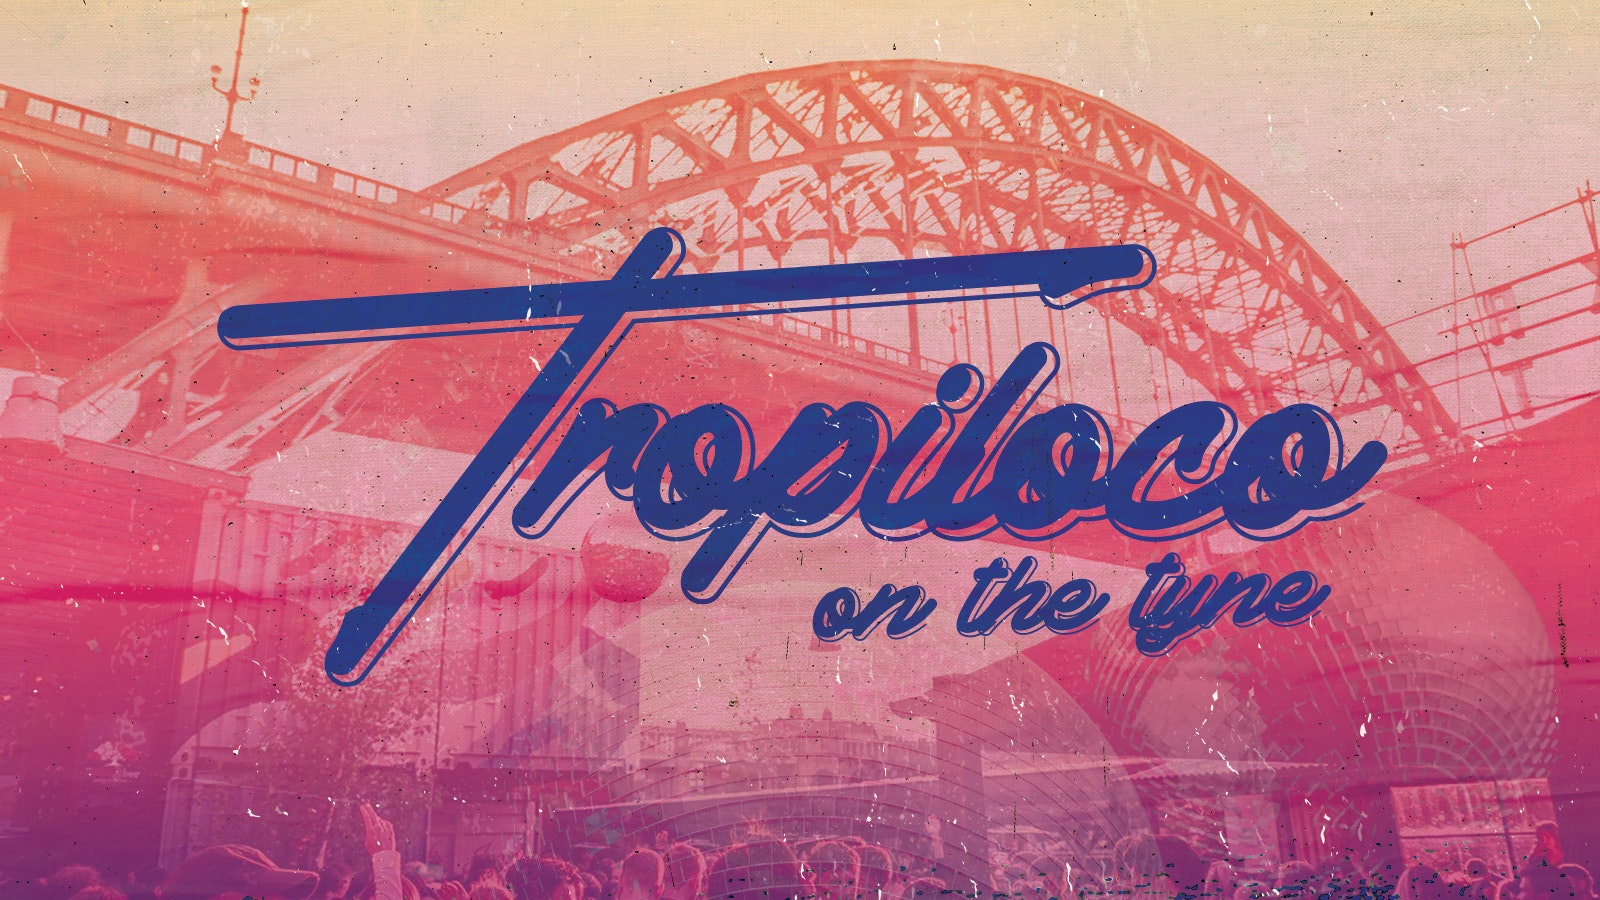 TROPILOCO ON THE TYNE ☀️🌊 SOLD OUT! // HWKRLAND // 6-11pm – 22nd April